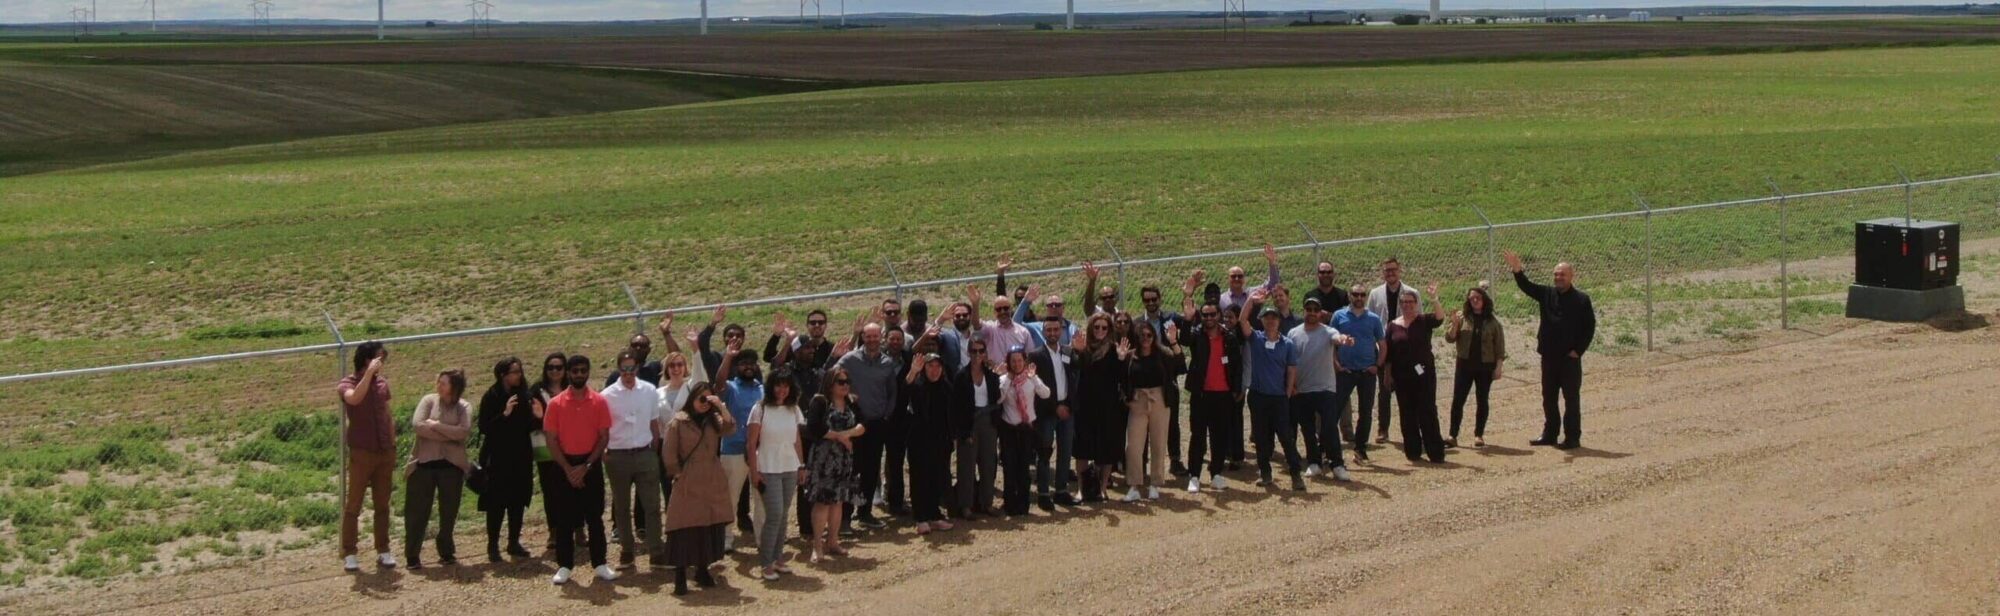 An above-landscape view of a group of approximately 60 people smiling and waving in front of four wind turbines in the distance behind them. It is a bright, windy day.